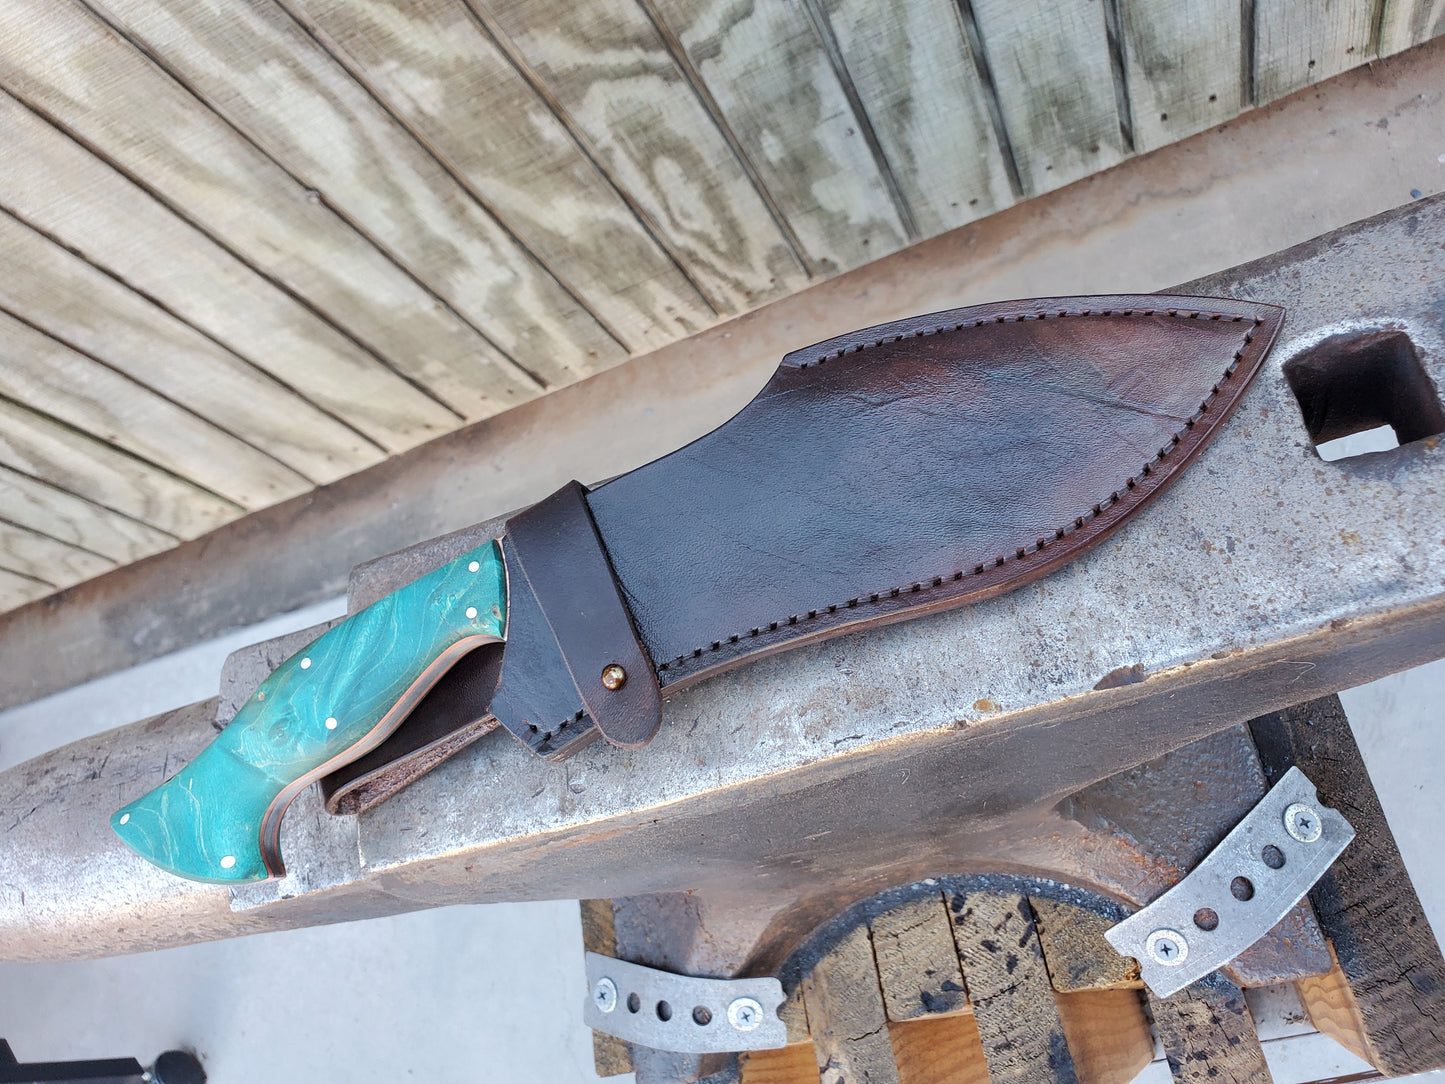 Forged 5160 Kukri with Exposed Copper Liners and a Leather Sheath